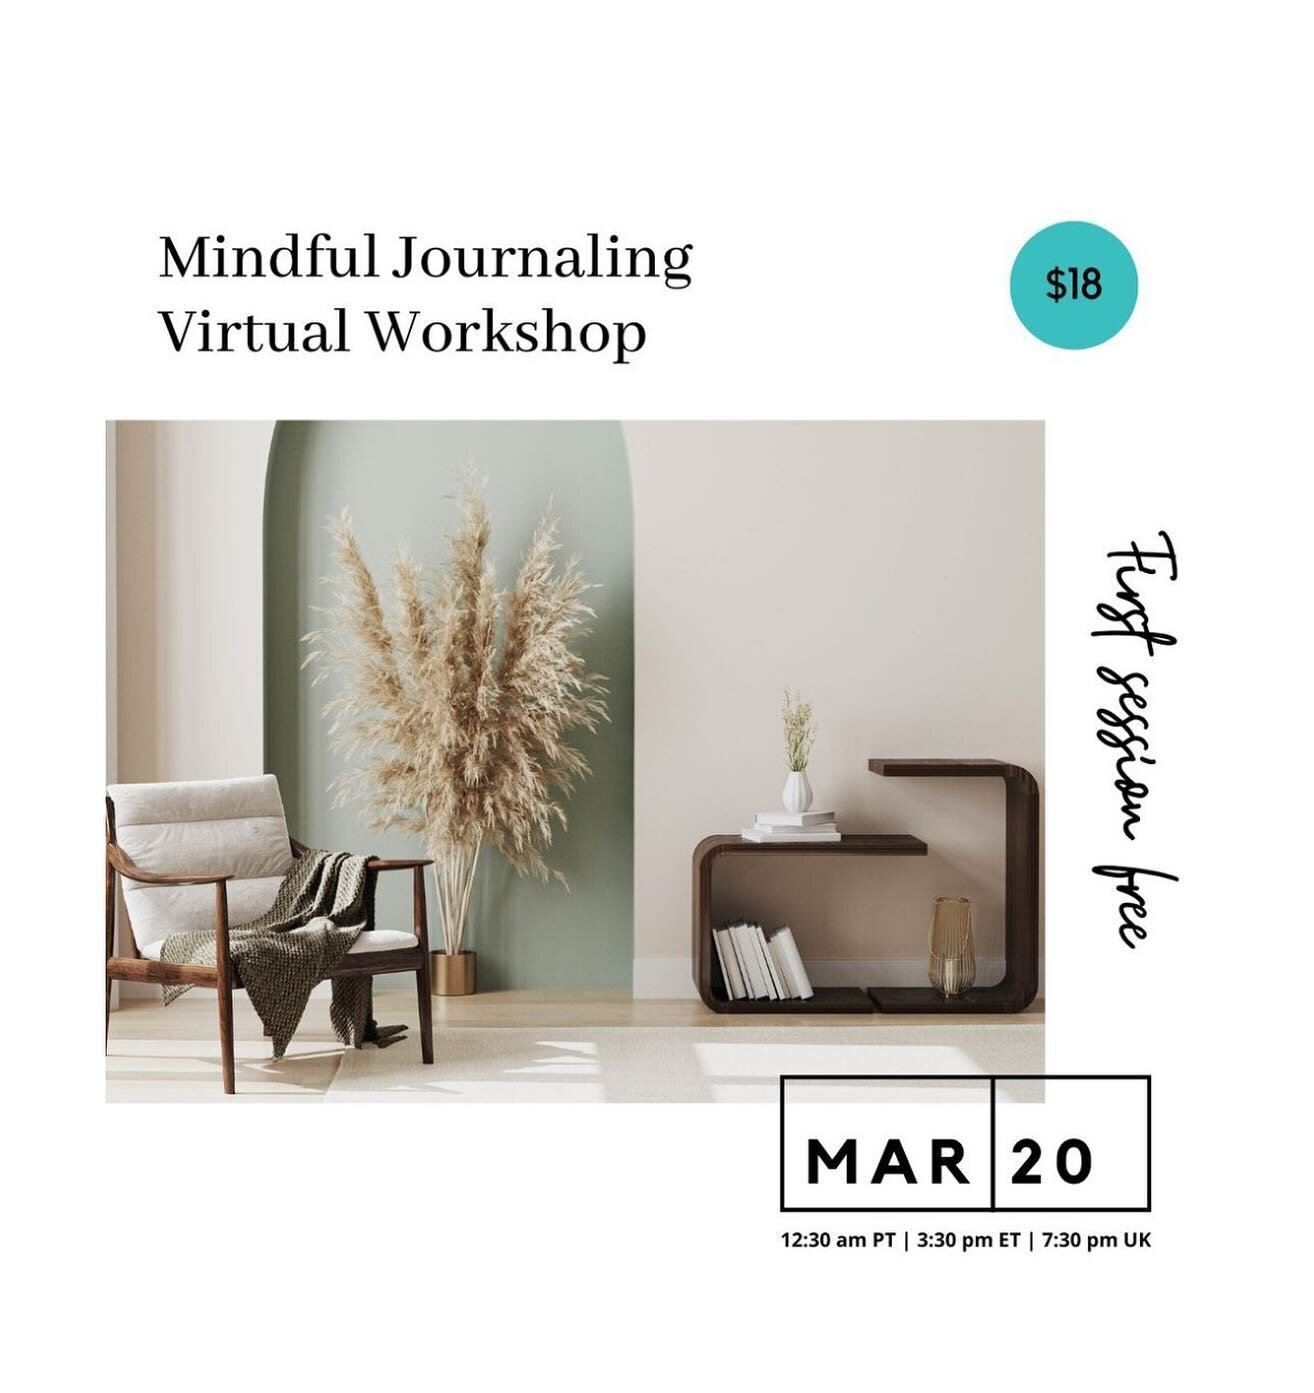 Consistency is key. Whether it&rsquo;s meditation, exercise, journaling, or living a conscious and present life, daily practice is the foundation. With our regular mindful journaling workshops, we aim to inspire you to cultivate good daily habits and